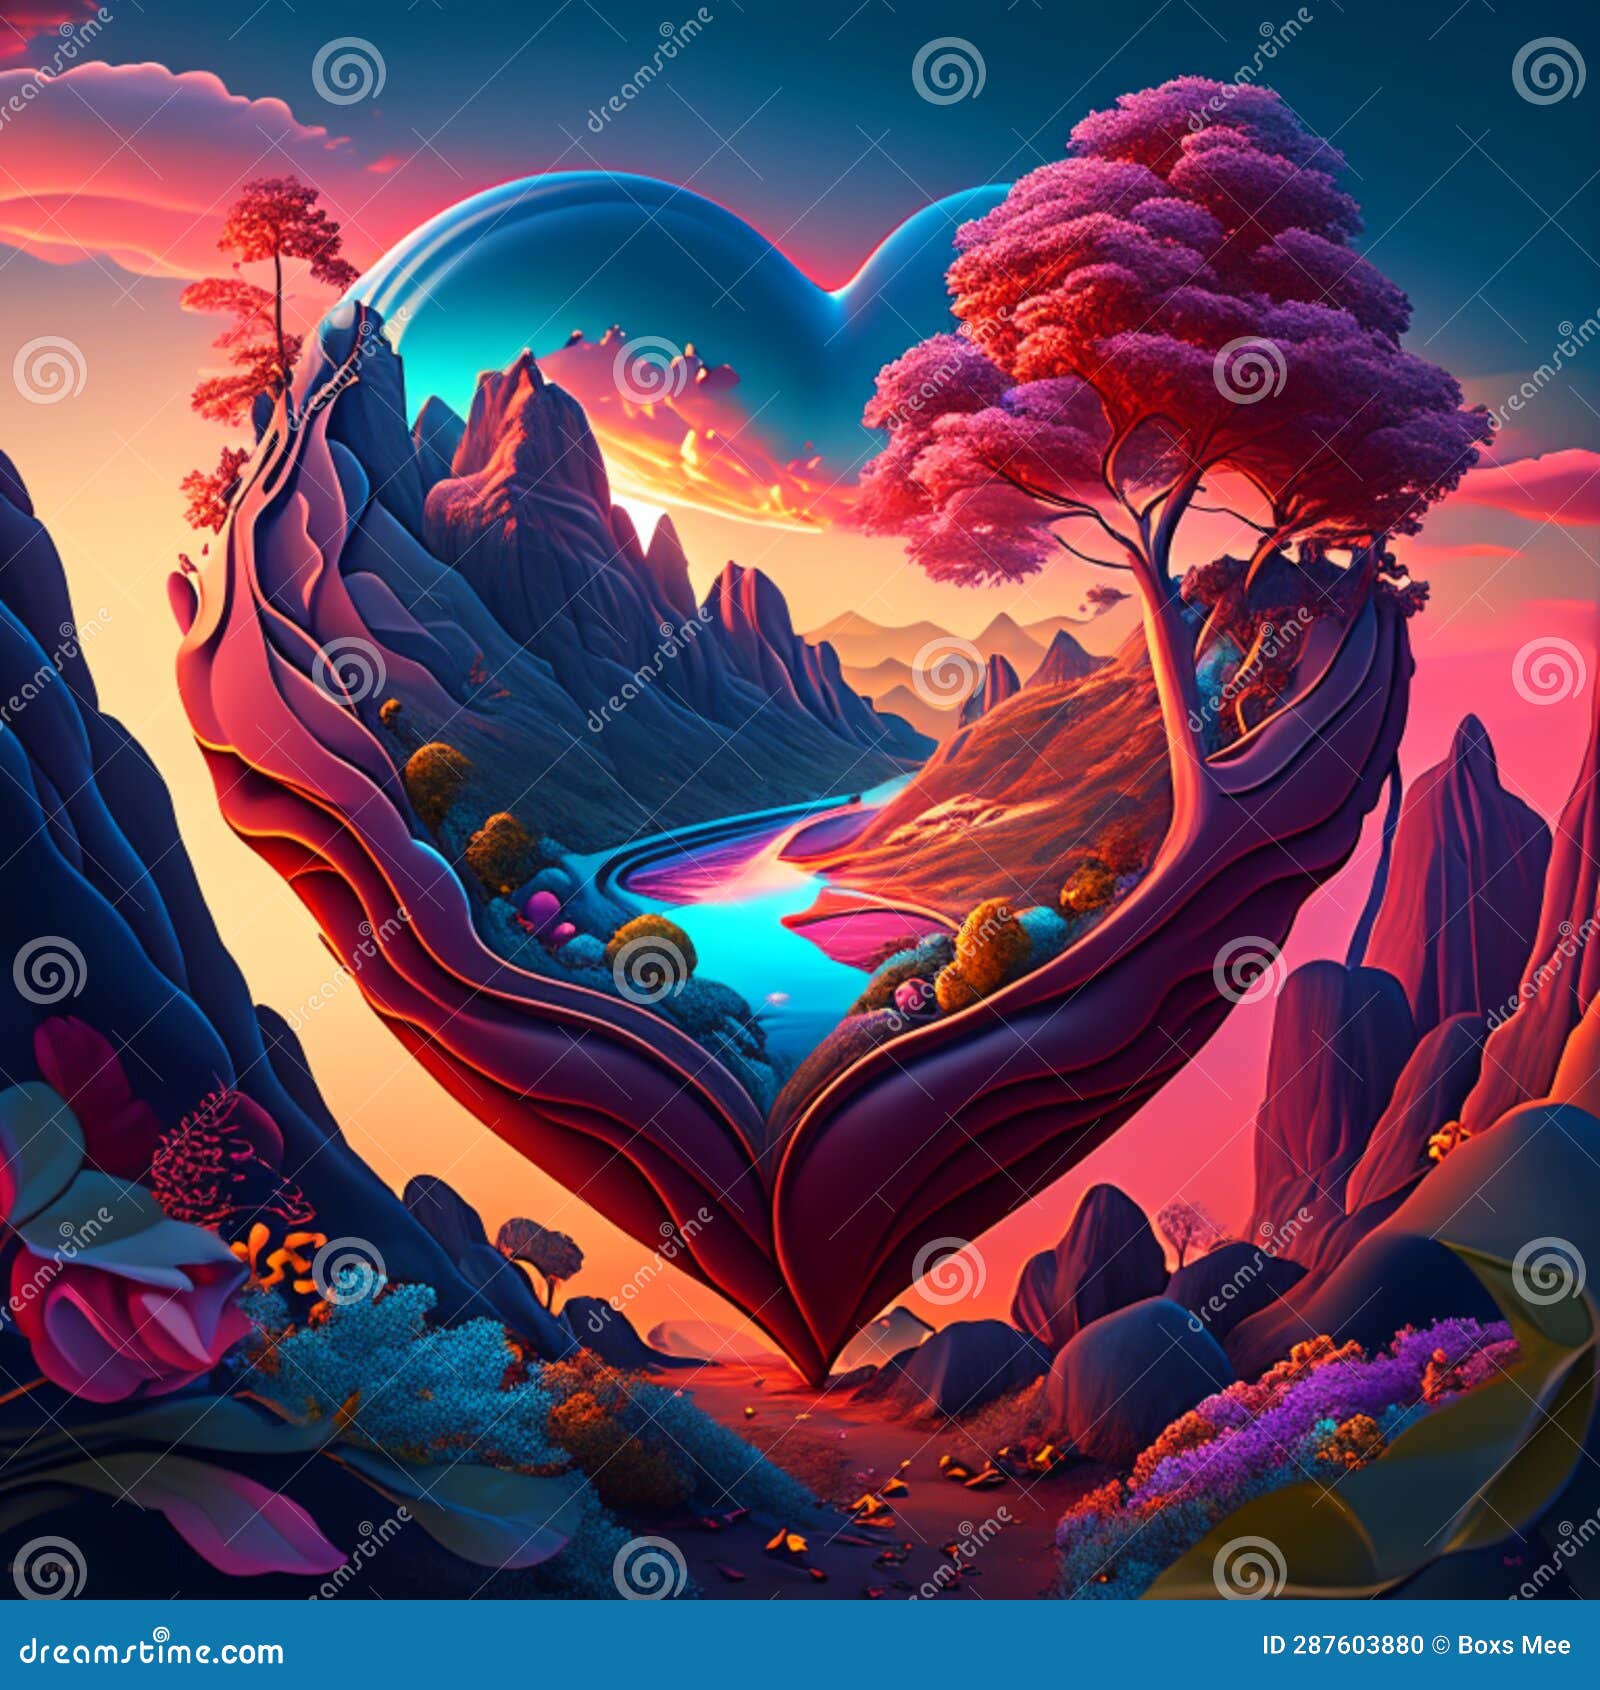 3d Illustration of a Heart-shaped Landscape with a Lake and Mountains ...